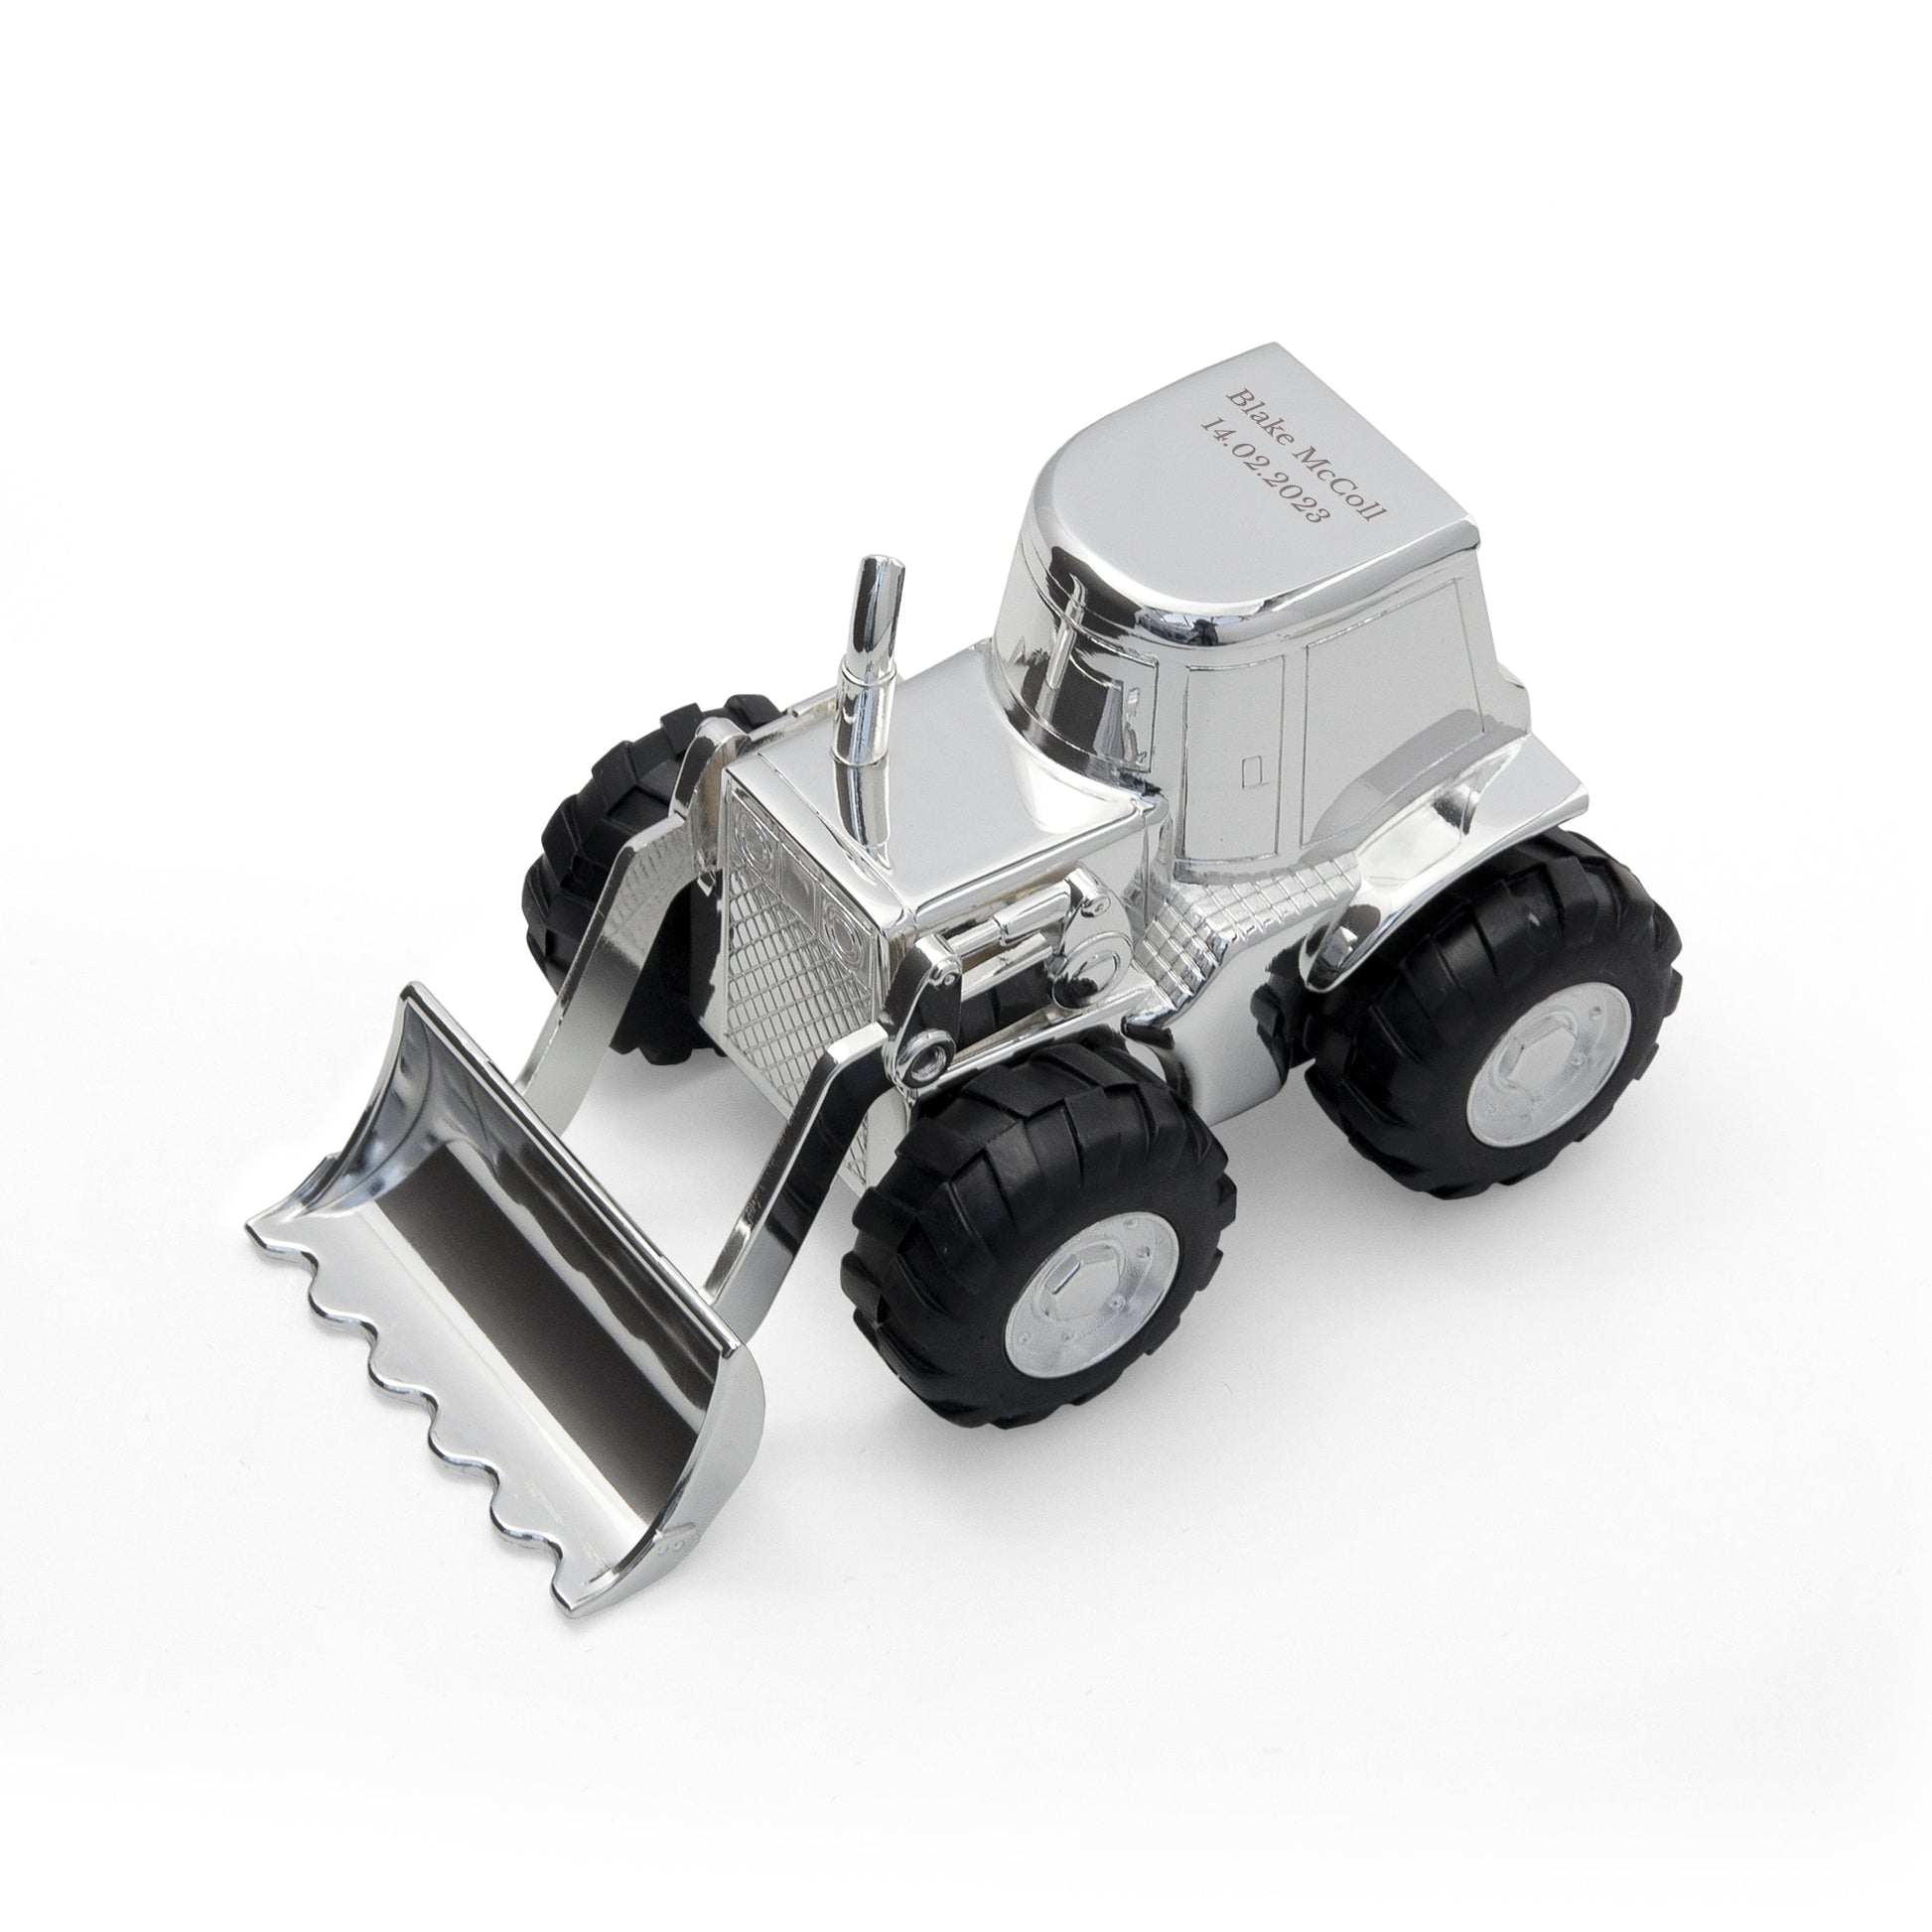 Personalized Money Boxes - Personalized Silver Plated Digger Money Box 